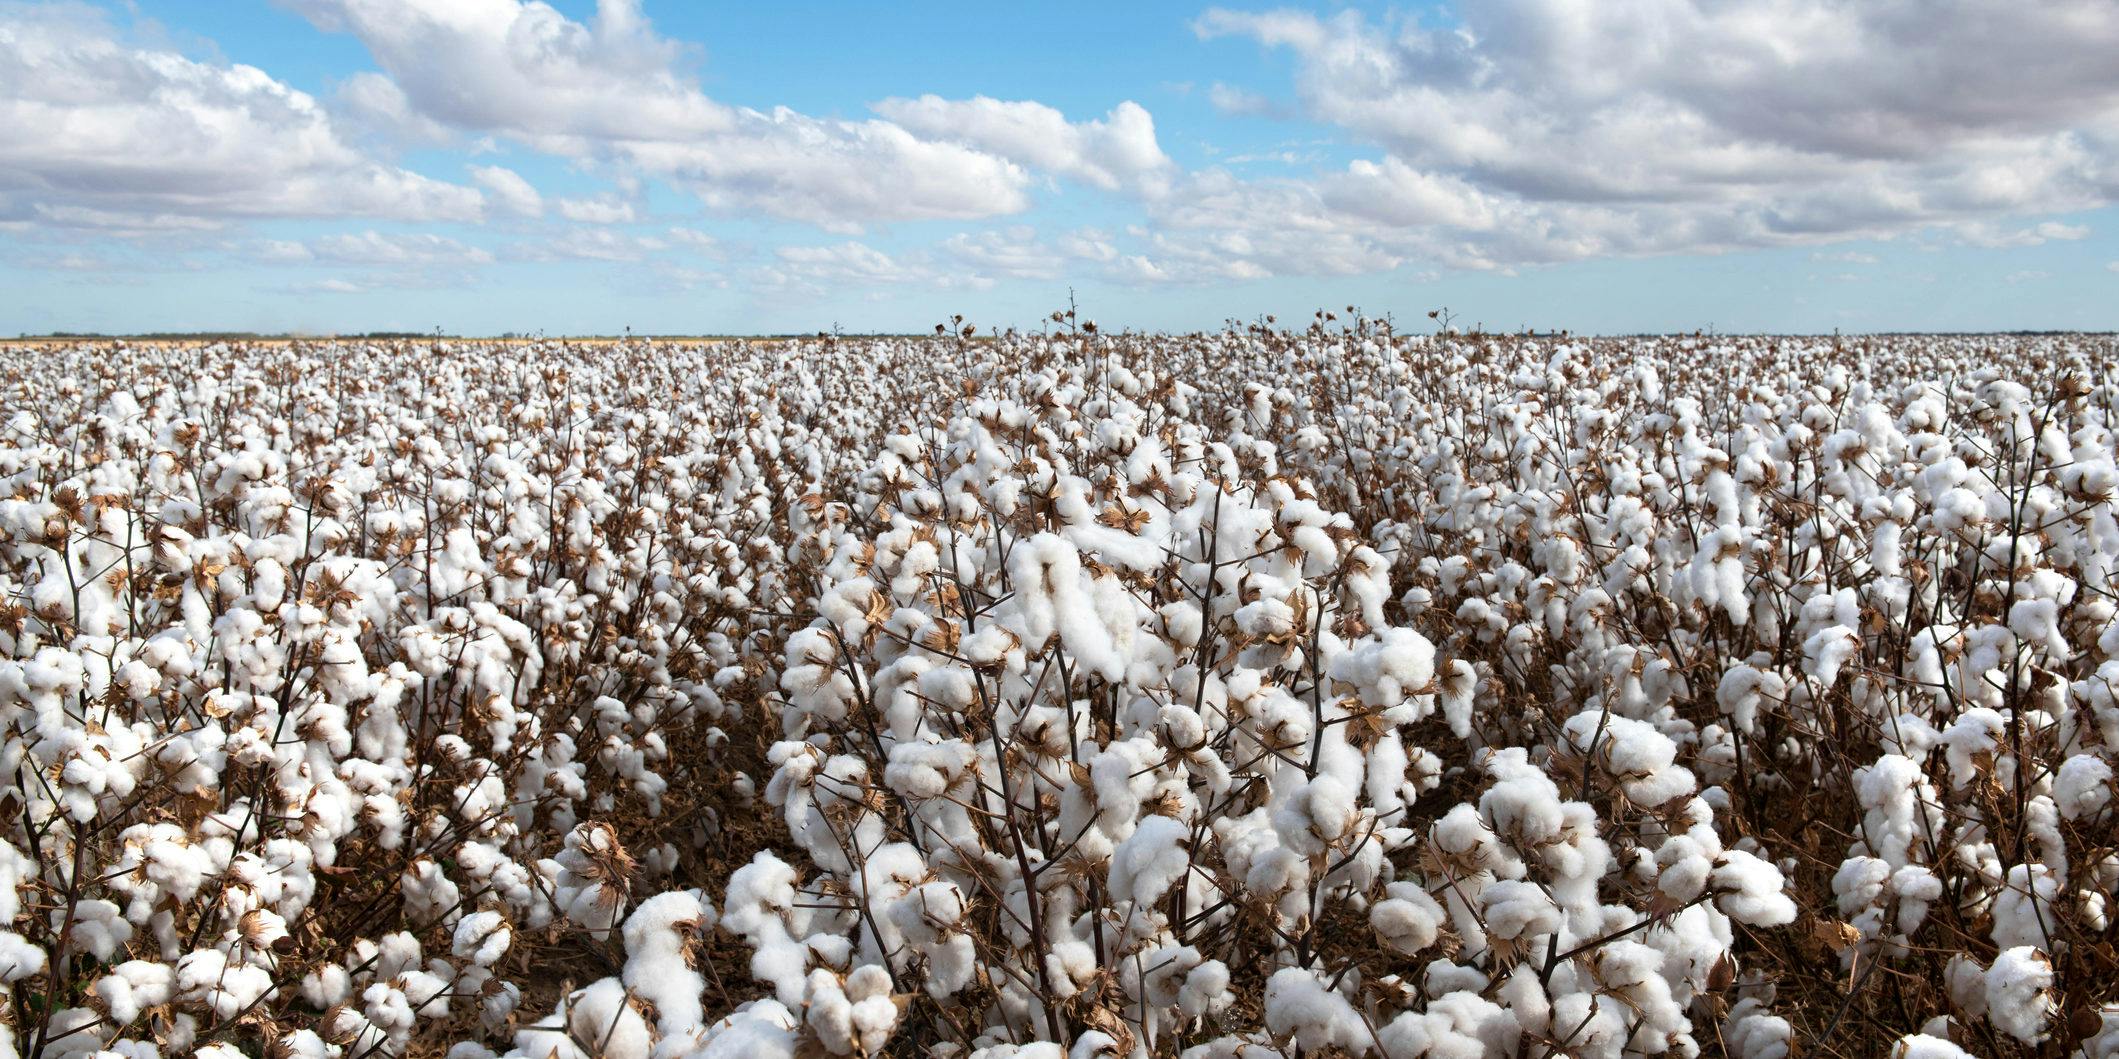 Champion for Cotton Growers, Advocate for All Ag description